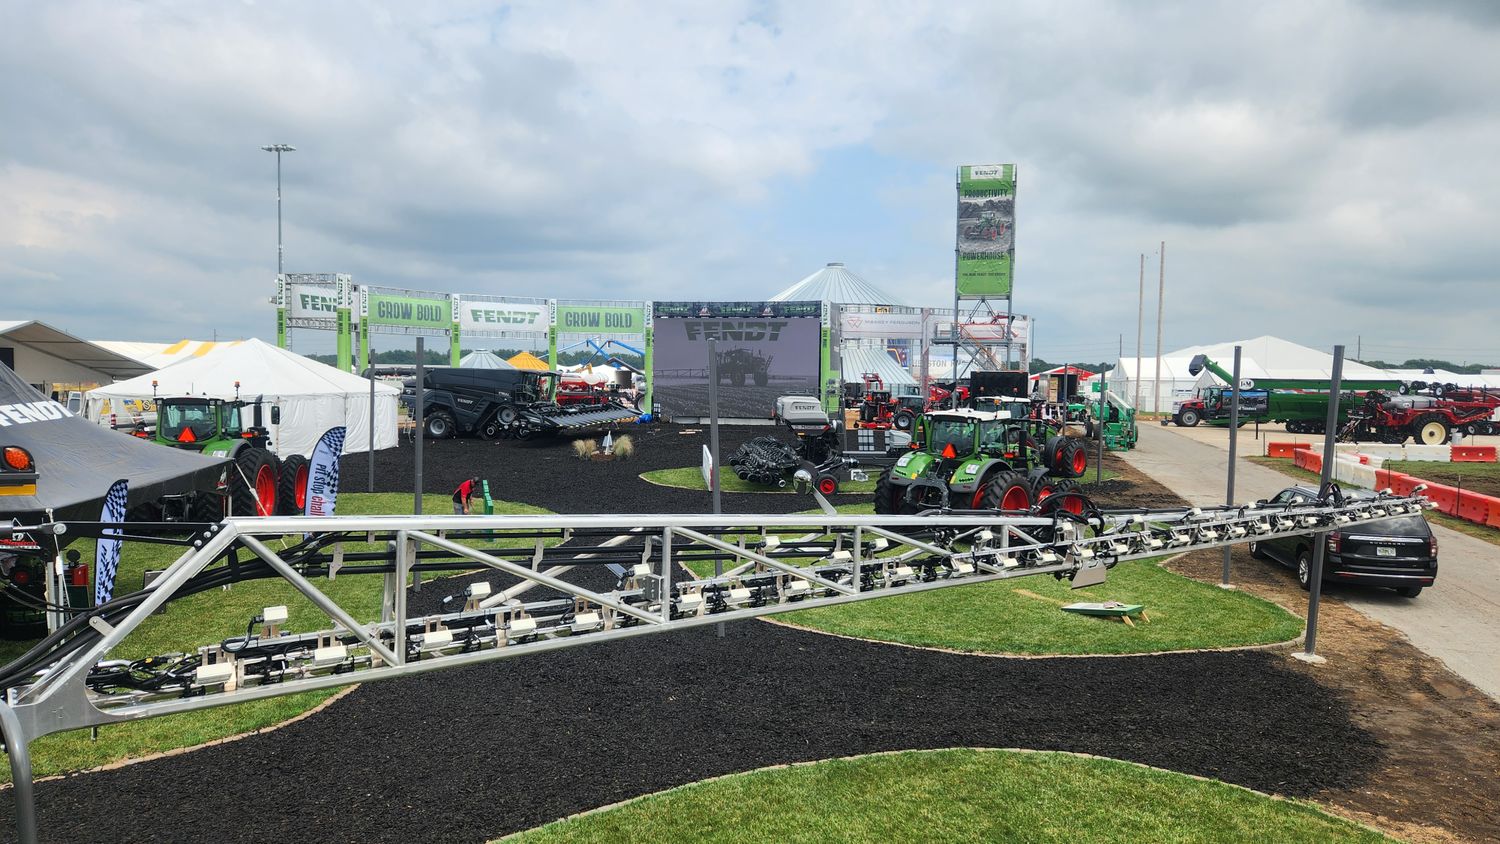 ONE SMART SPRAY from Fendt and Bosch BASF Wins CropLife IRON Showstopper Award at MAGIE 2023